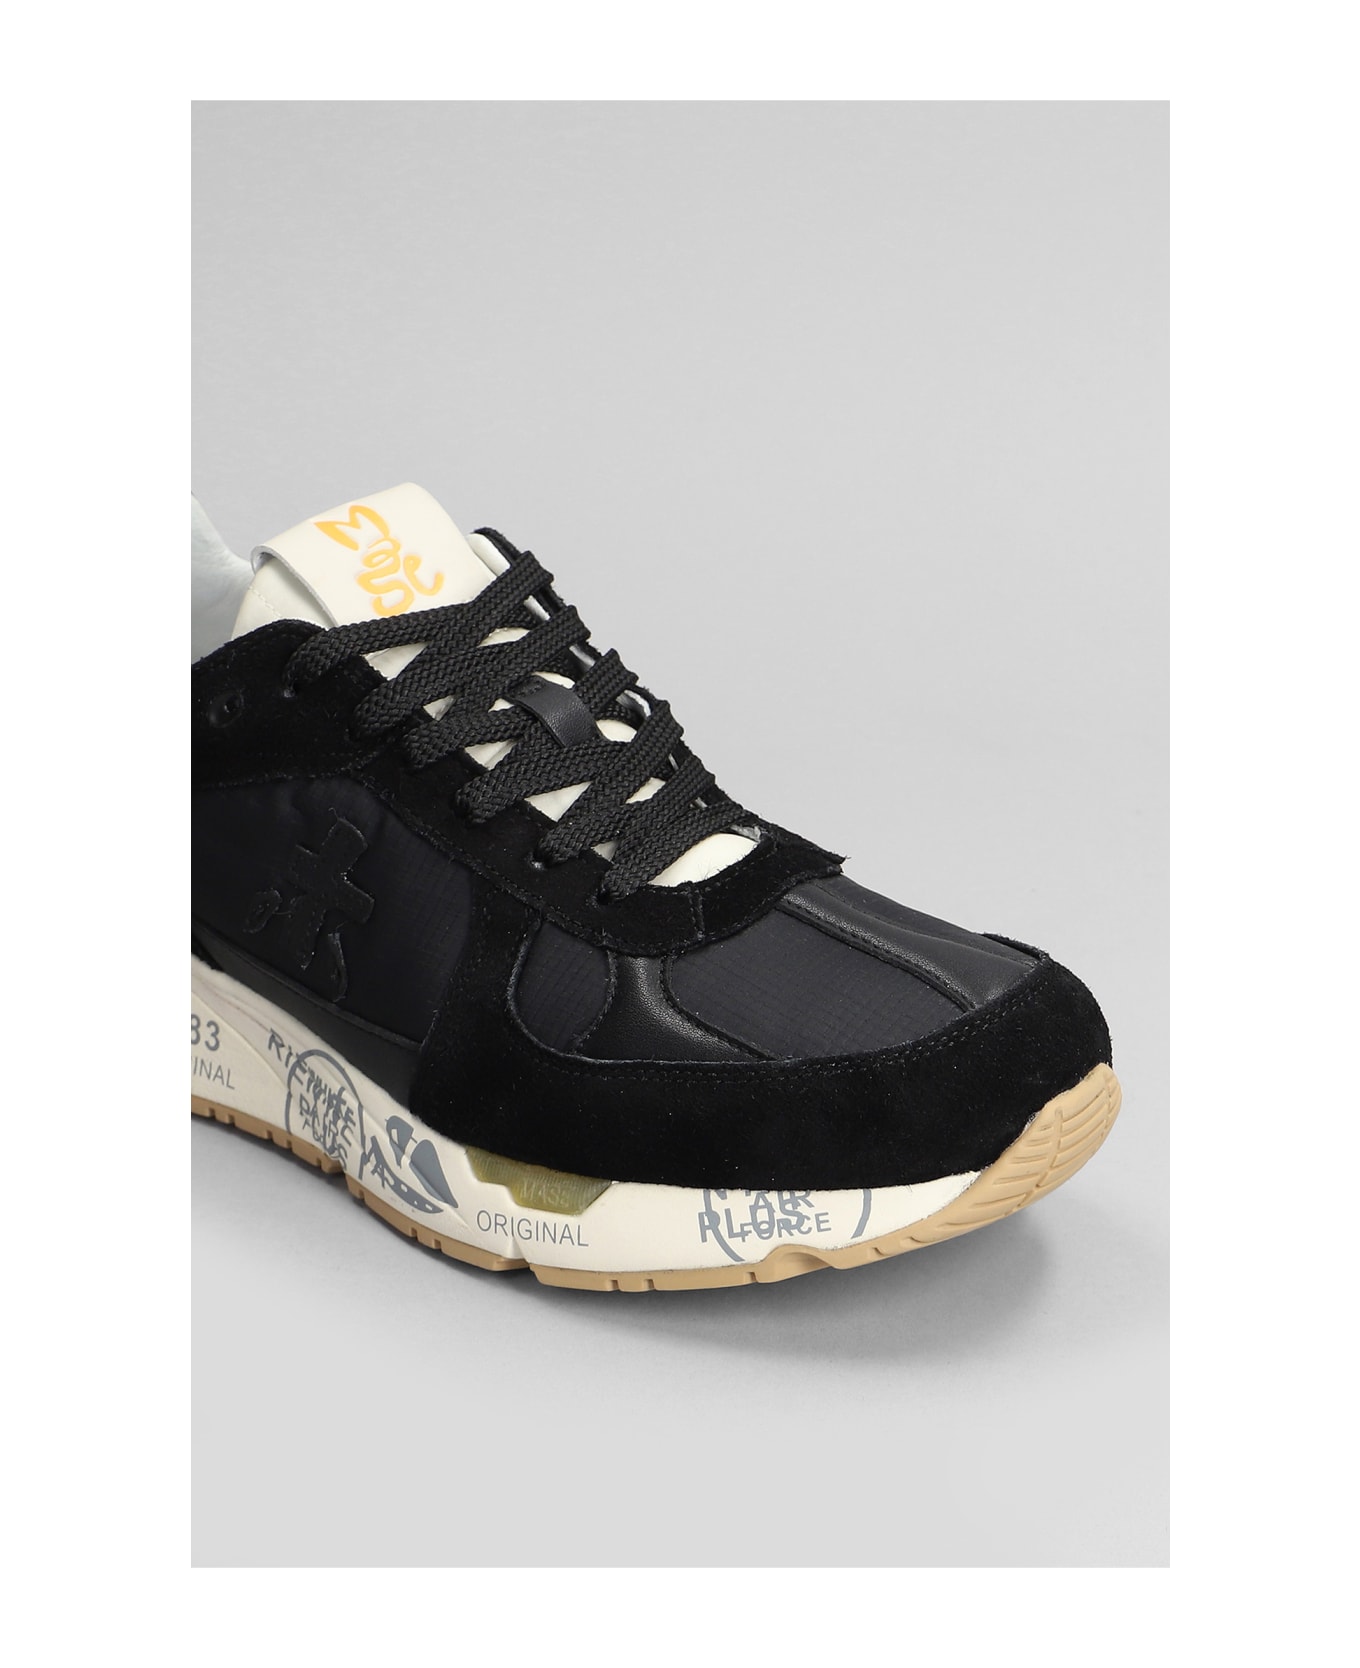 Premiata Mase Sneakers In Black Suede And Fabric - Black